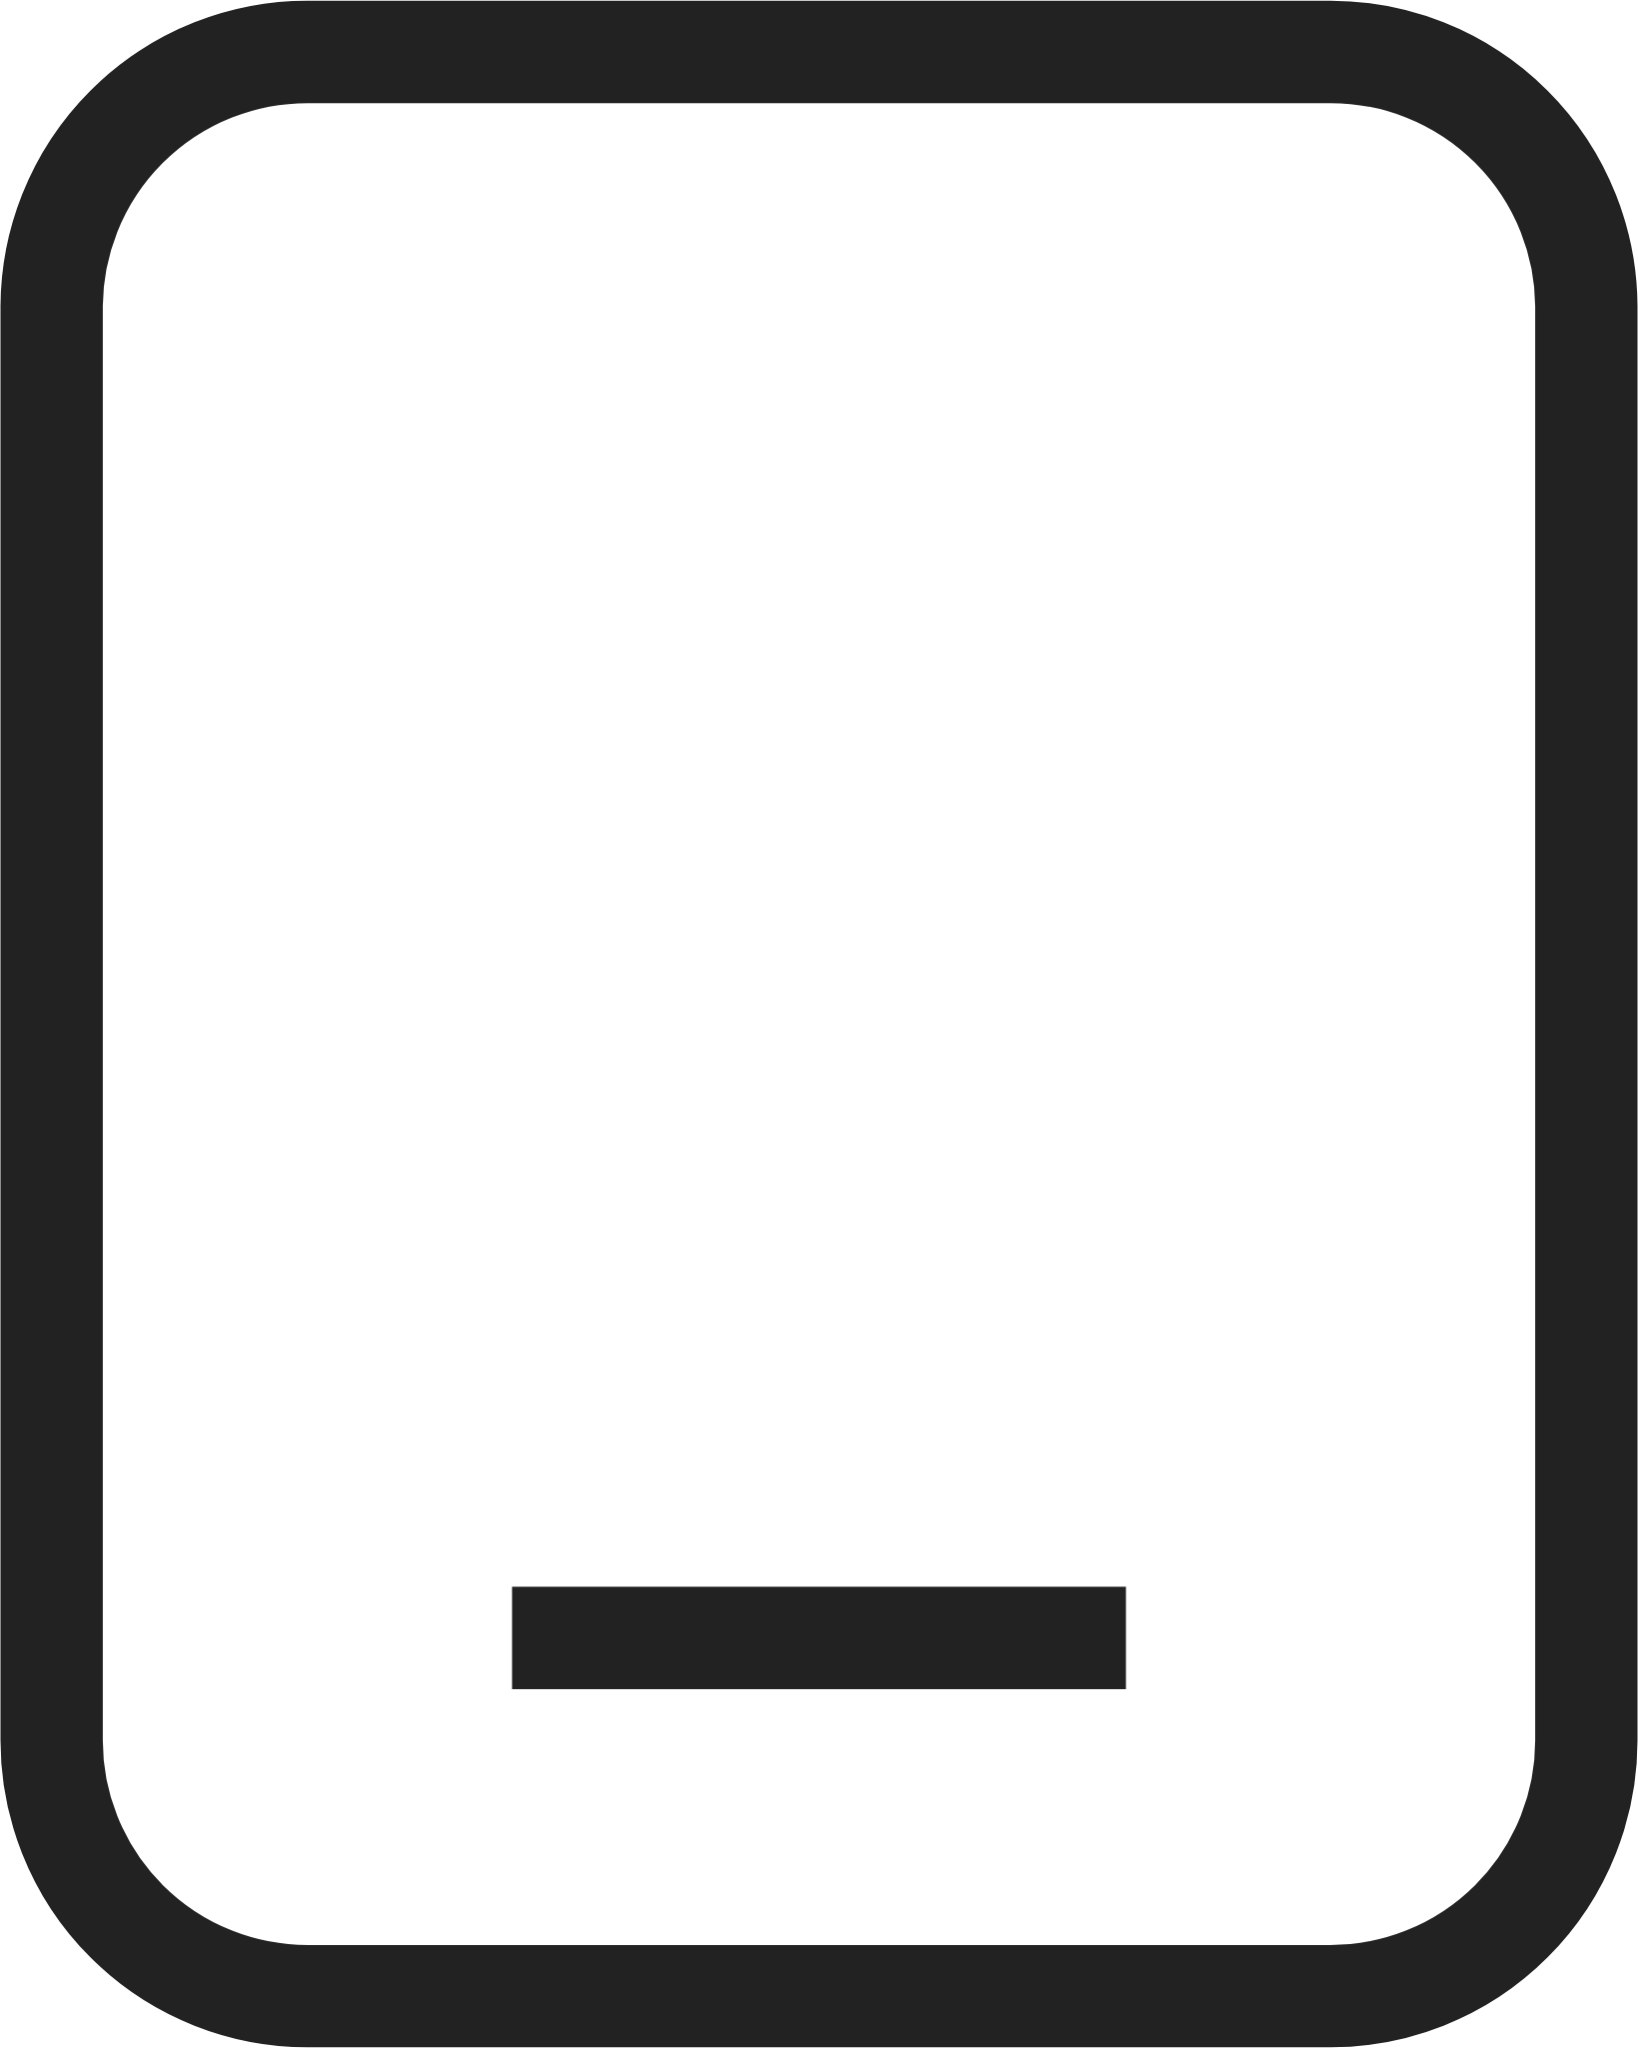 Tablet light icon